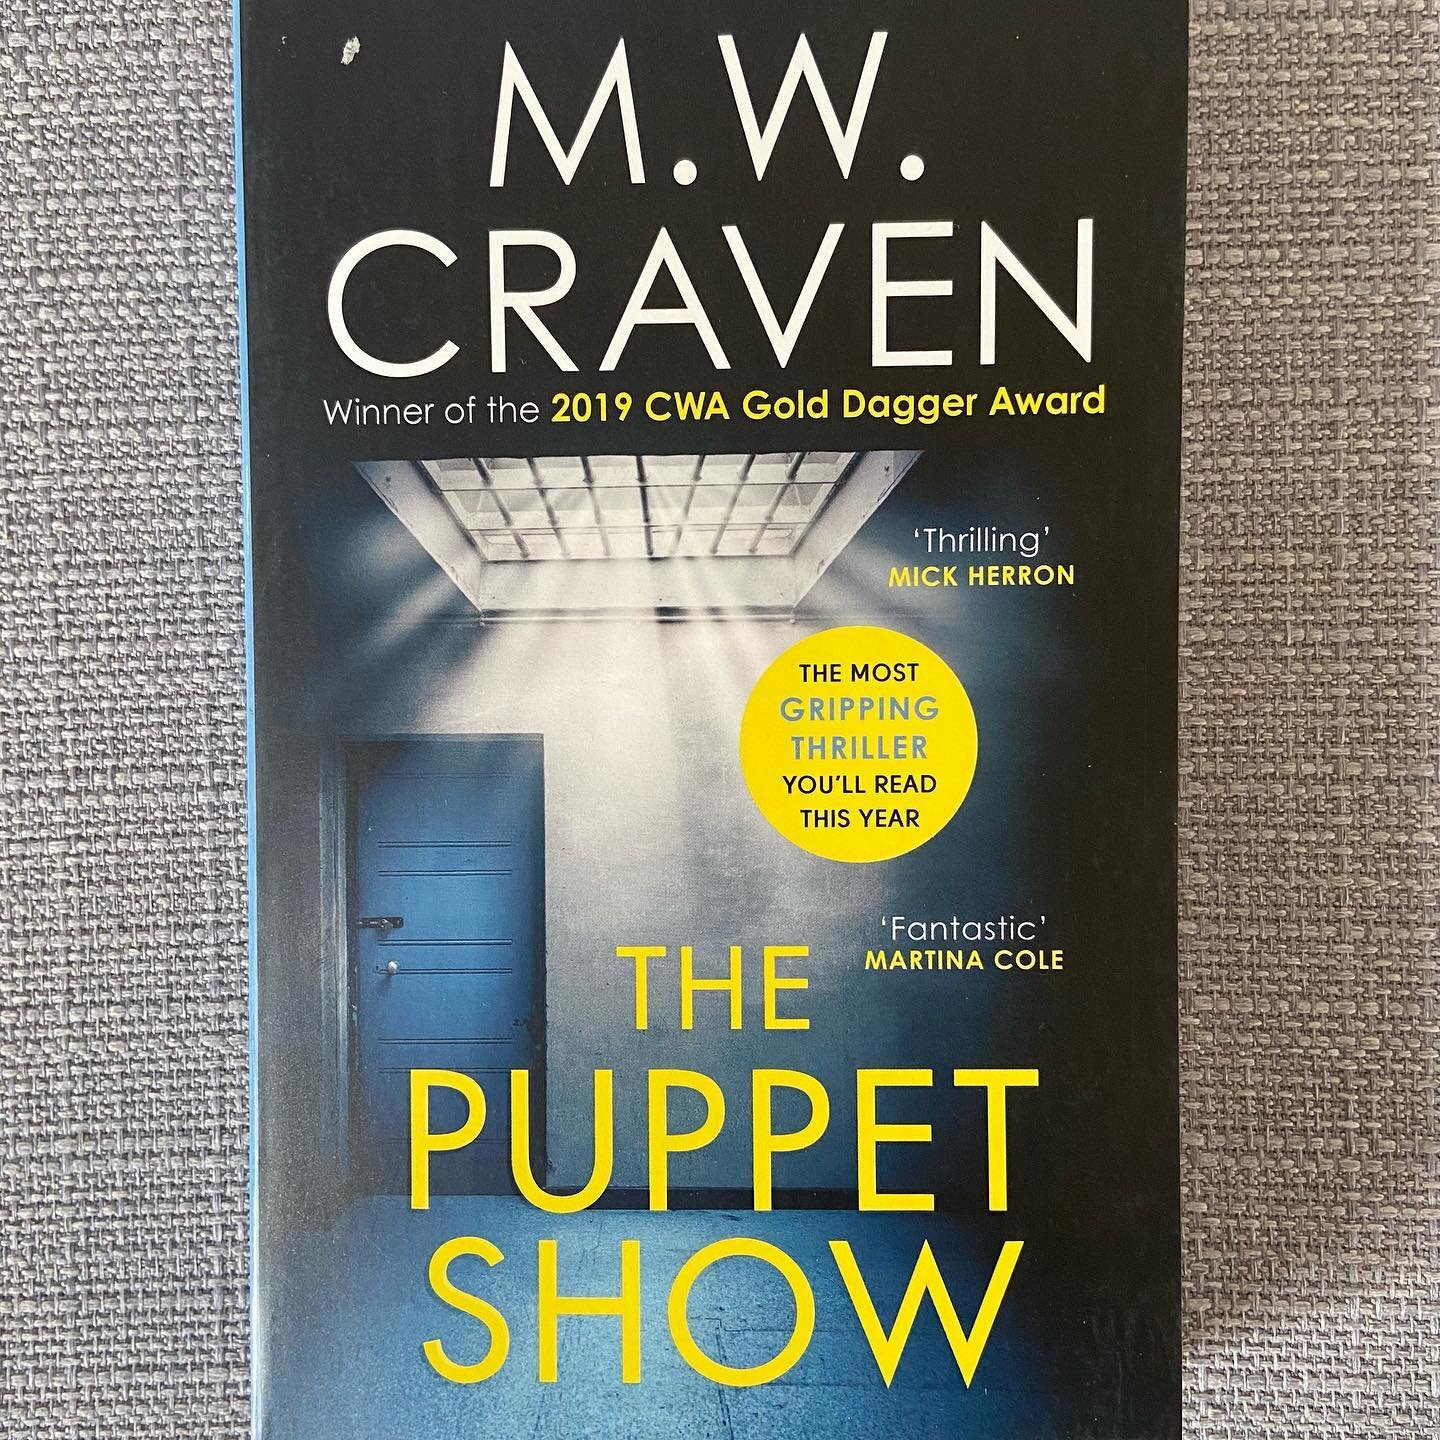 Everyone raves about this series and it&rsquo;s passed me by so @bethwright26 kindly sent me a copy of book one, #ThePuppetShow by @m.w.craven. Thanks so much!